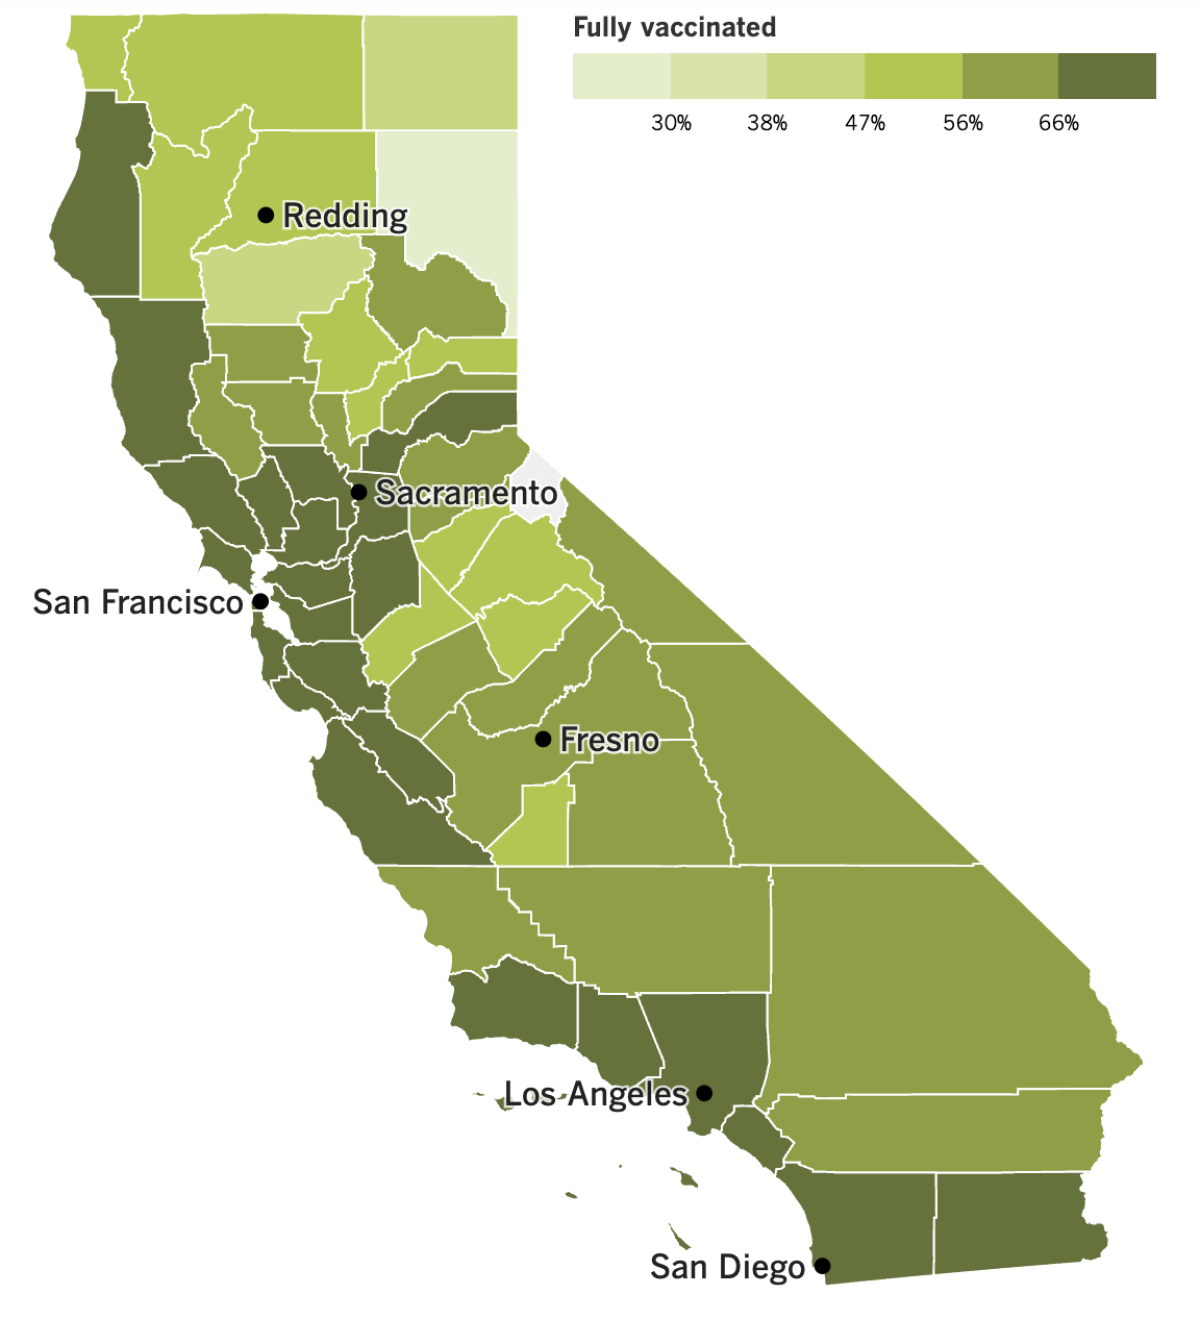 A map showing California's COVID-19 vaccination progress by county as of Feb. 14, 2023.